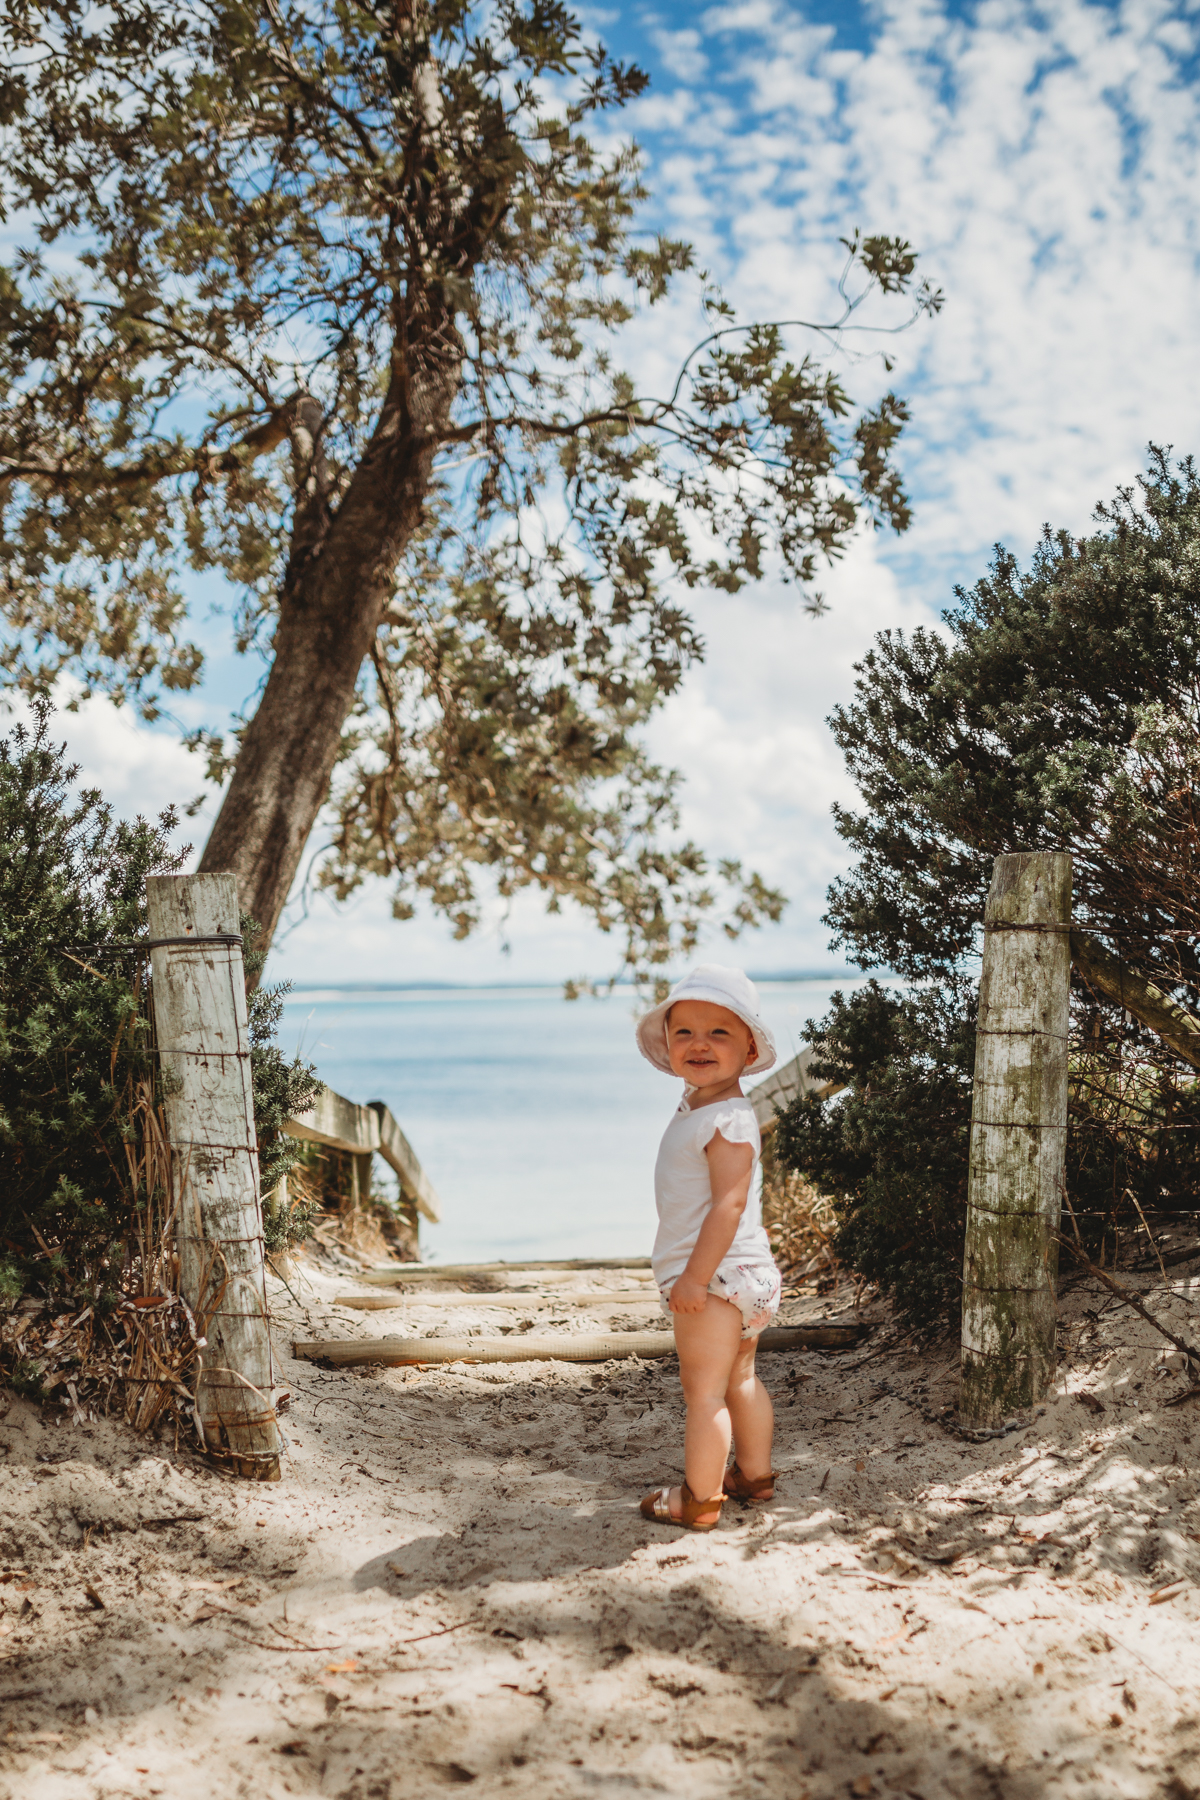 Little girl with white hat standing at pathway to beach, smiling